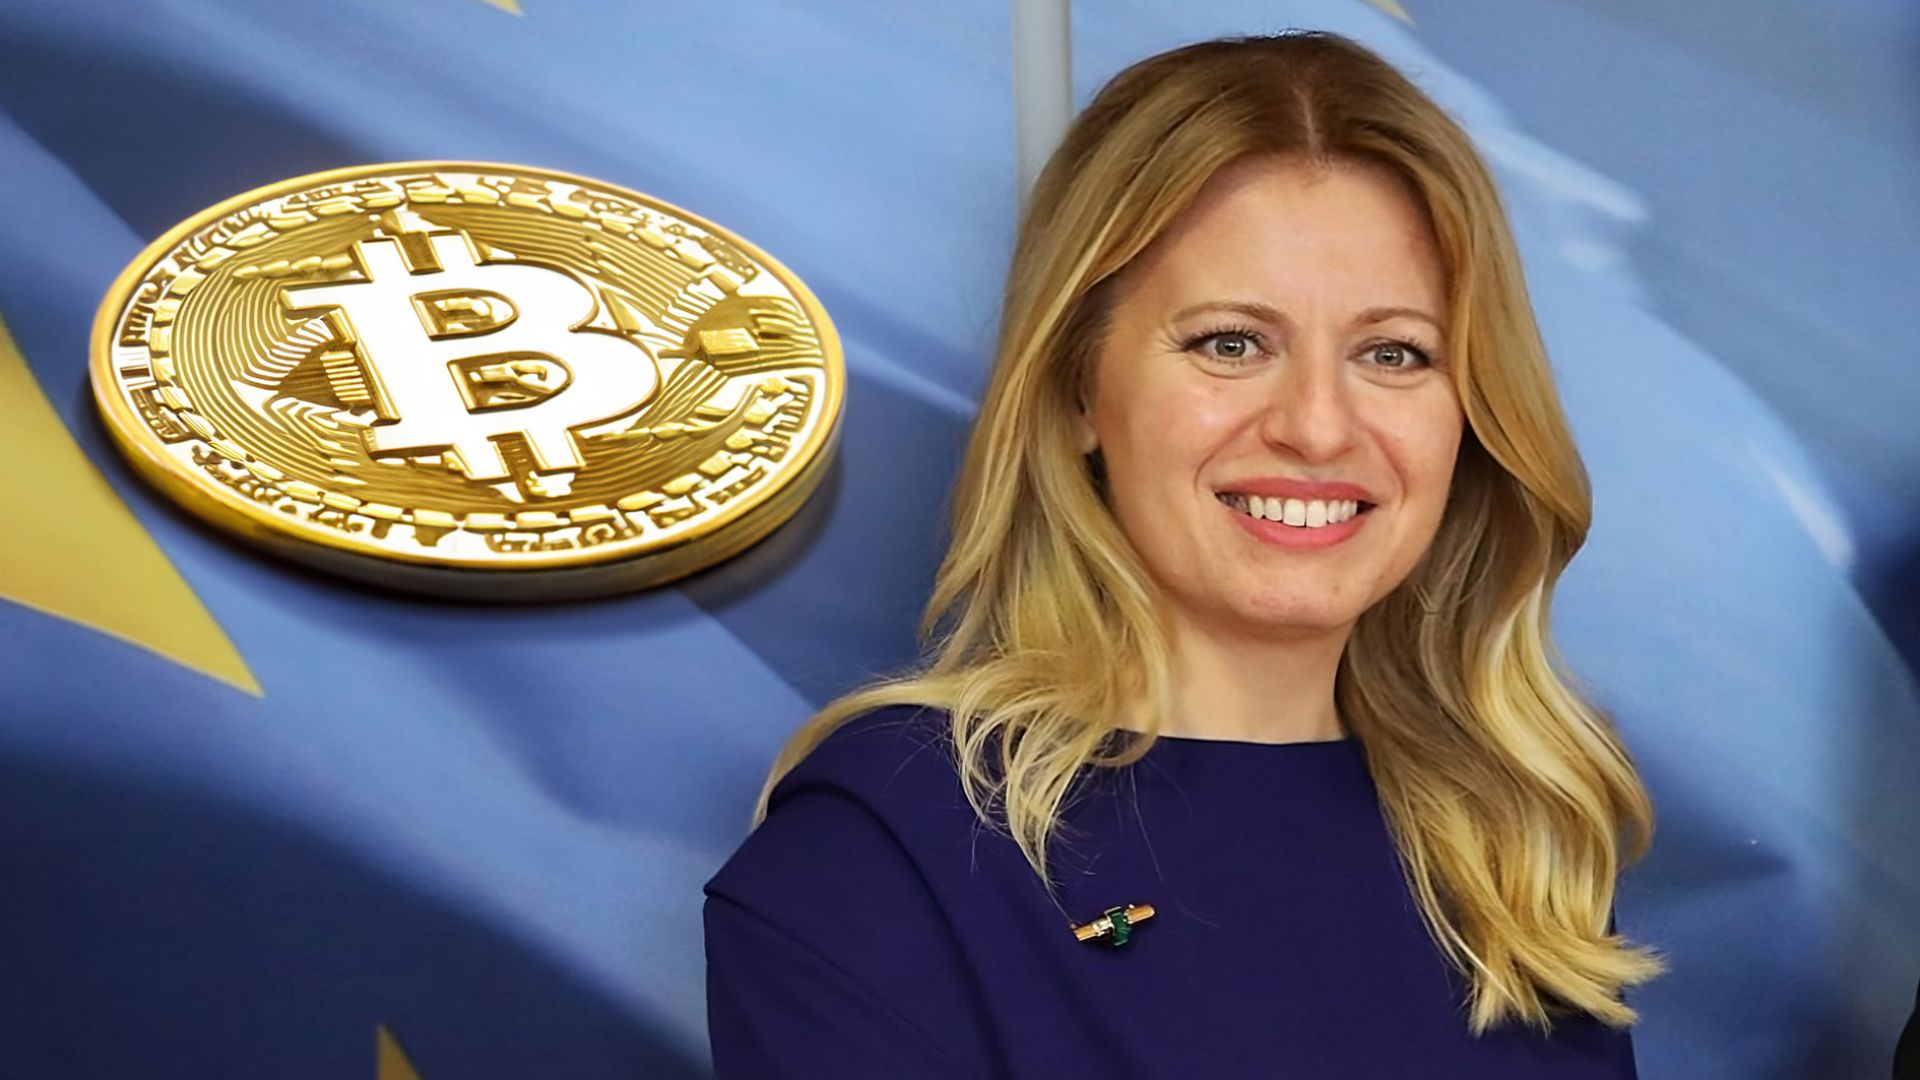 President Čaputová and the New Era of Cryptocurrencies in Slovakia